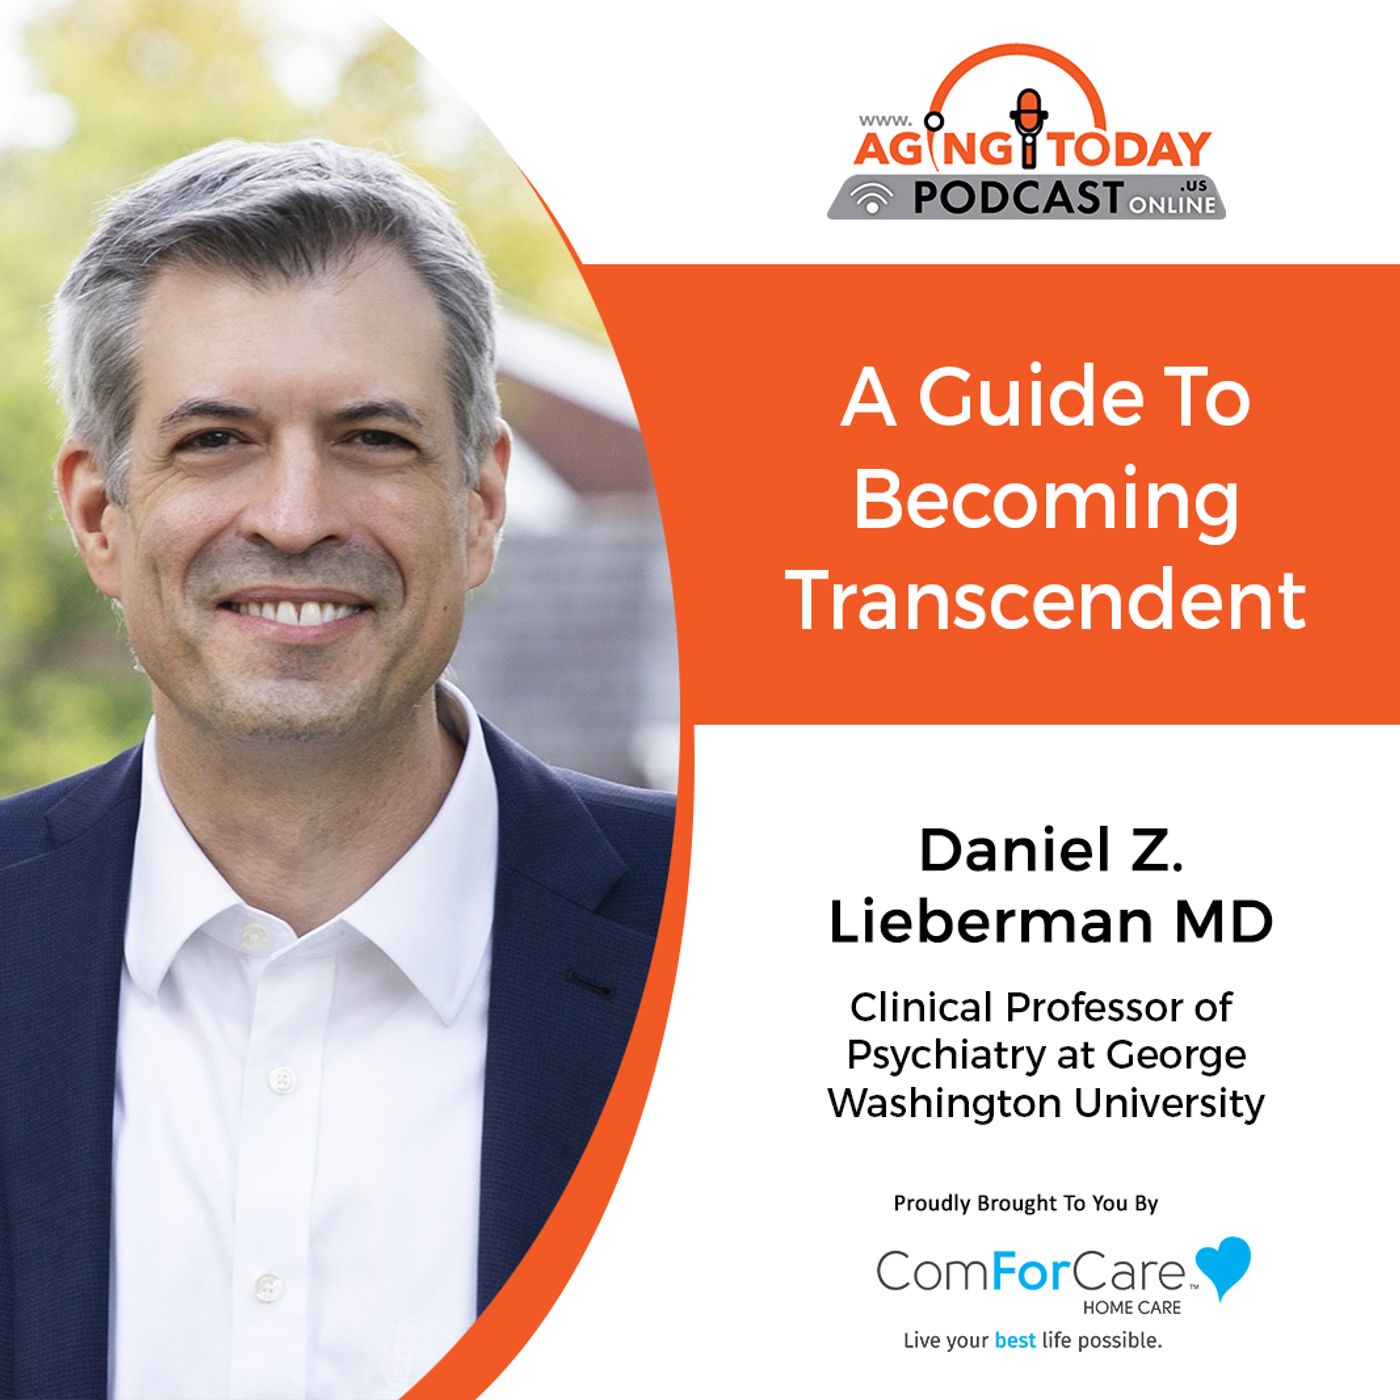 3/13/23: Dr. Lieberman from Daniel Z. Lieberman, MD | A Guide to Becoming Transcendent | Aging Today Podcast with Mark Turnbull